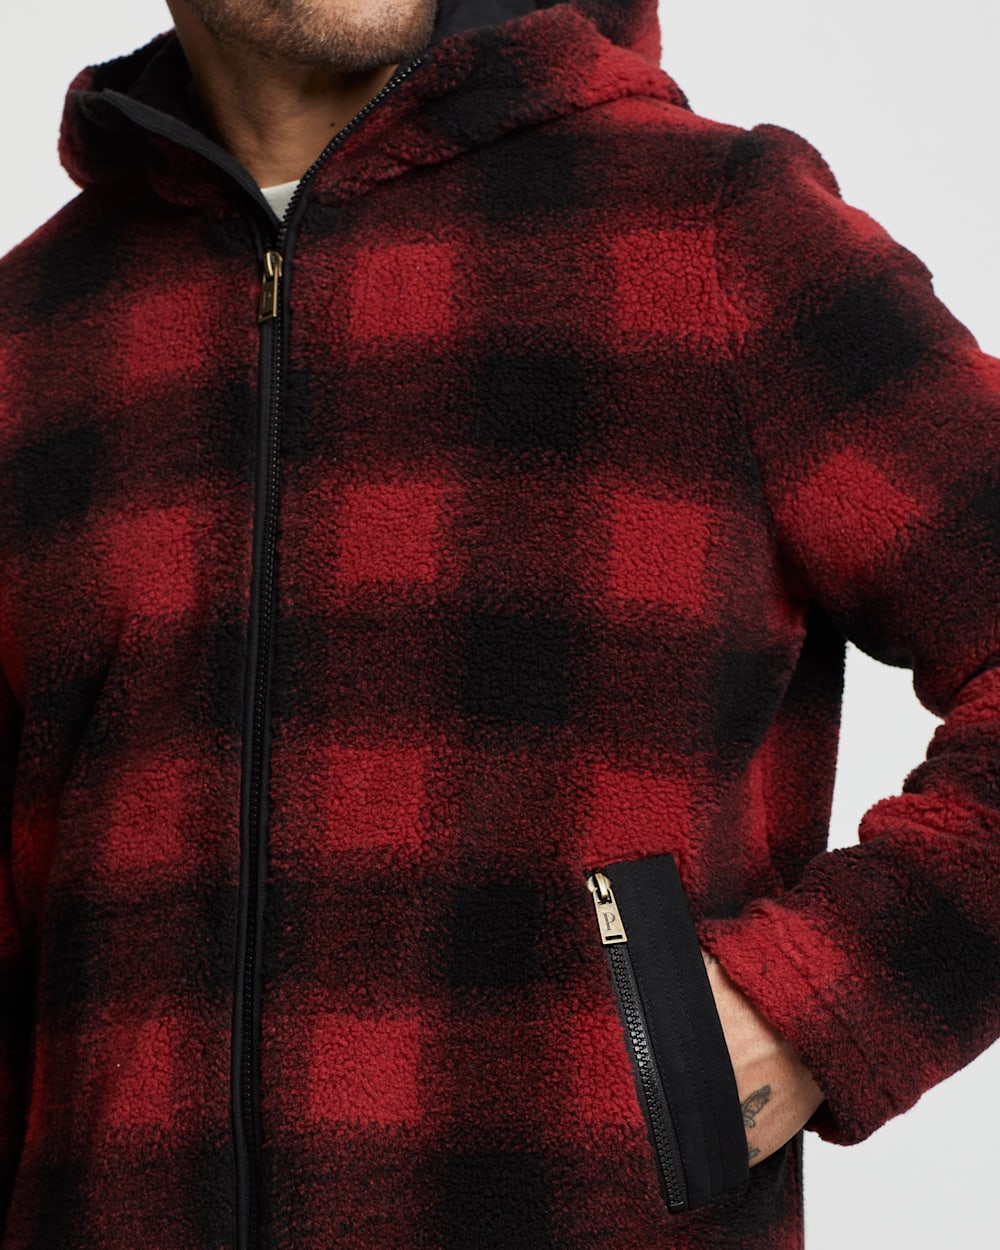 ALTERNATE VIEW OF MEN'S WOODSIDE HOODED FLEECE JACKET IN RED BUFFALO CHECK image number 4